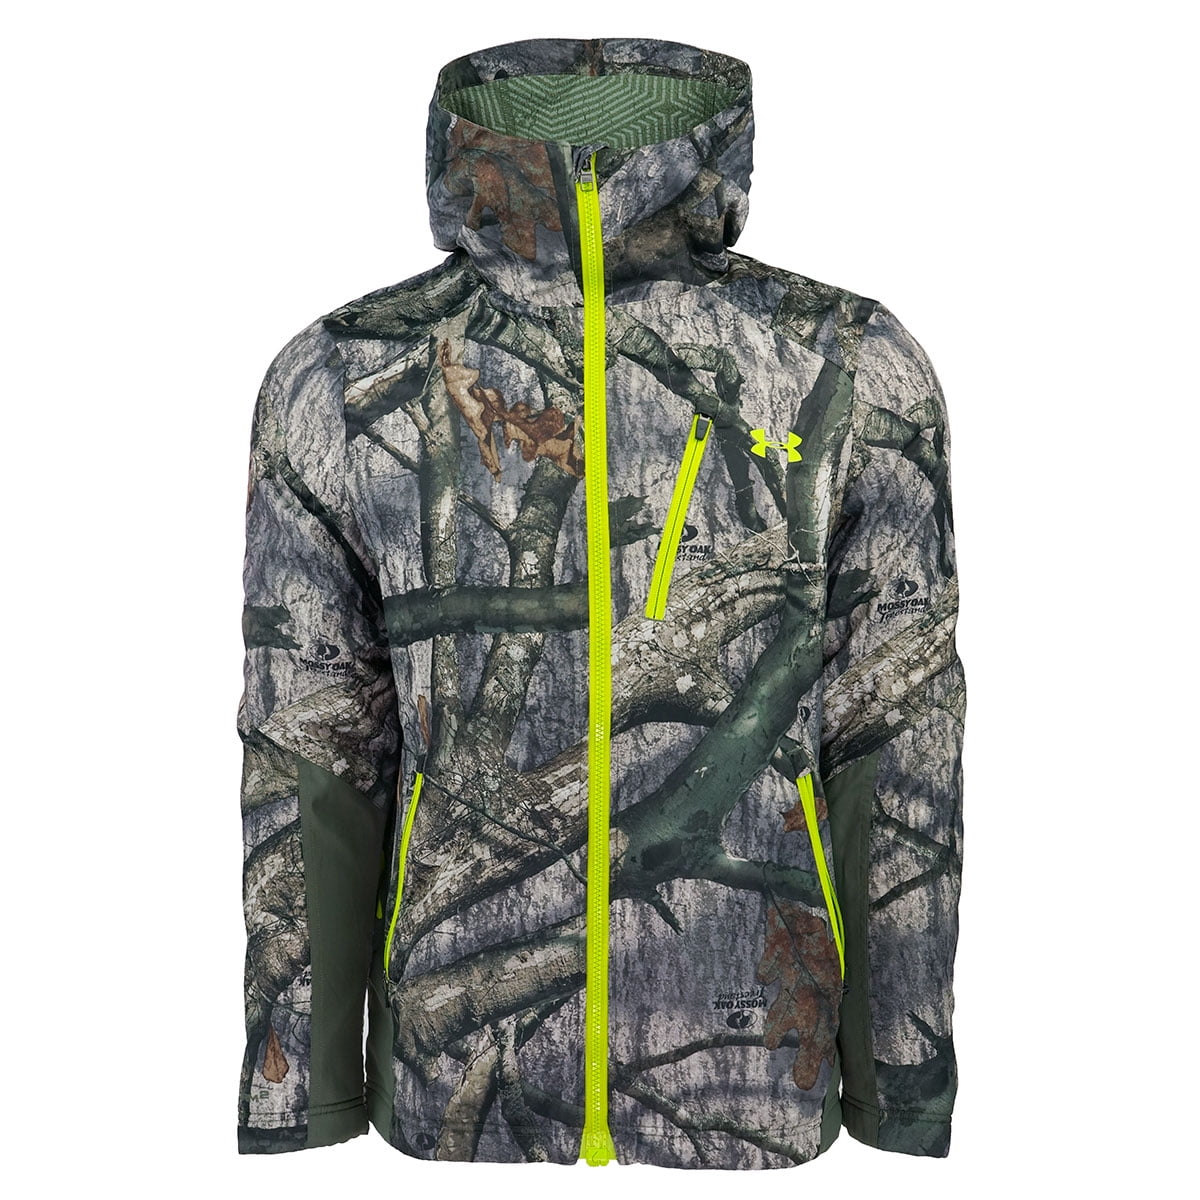 Under Armour Storm Jacket. Under Armour Mossy Taupe. Men's COLDGEAR® Infrared down Vest. Under Armour Storm Gear Hoodie.